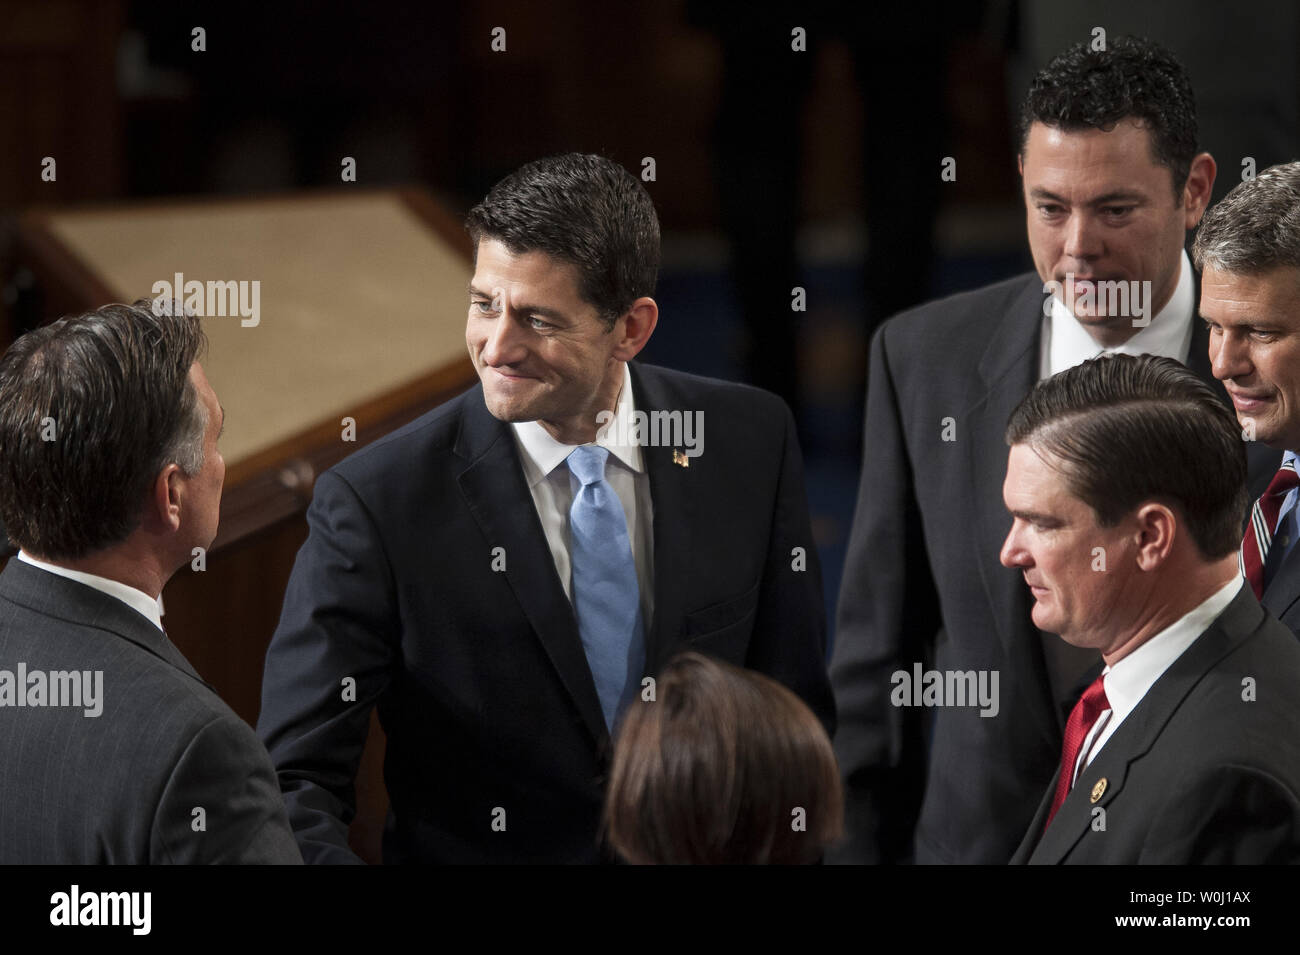 Republican caucus nominee for Speaker of the House, Rep. Paul Ryan (R-WI) is greeted by fellow Members of Congress on the floor  of the House of Representatives on October 29, 2015 in Washington, D.C.   Earlier, the outgoing Speaker, Rep. John Boehner (R-OH), gave his farewell address to Congress. He is retiring on October 30, 2015. Photo by Pete Marovich/UPI Stock Photo